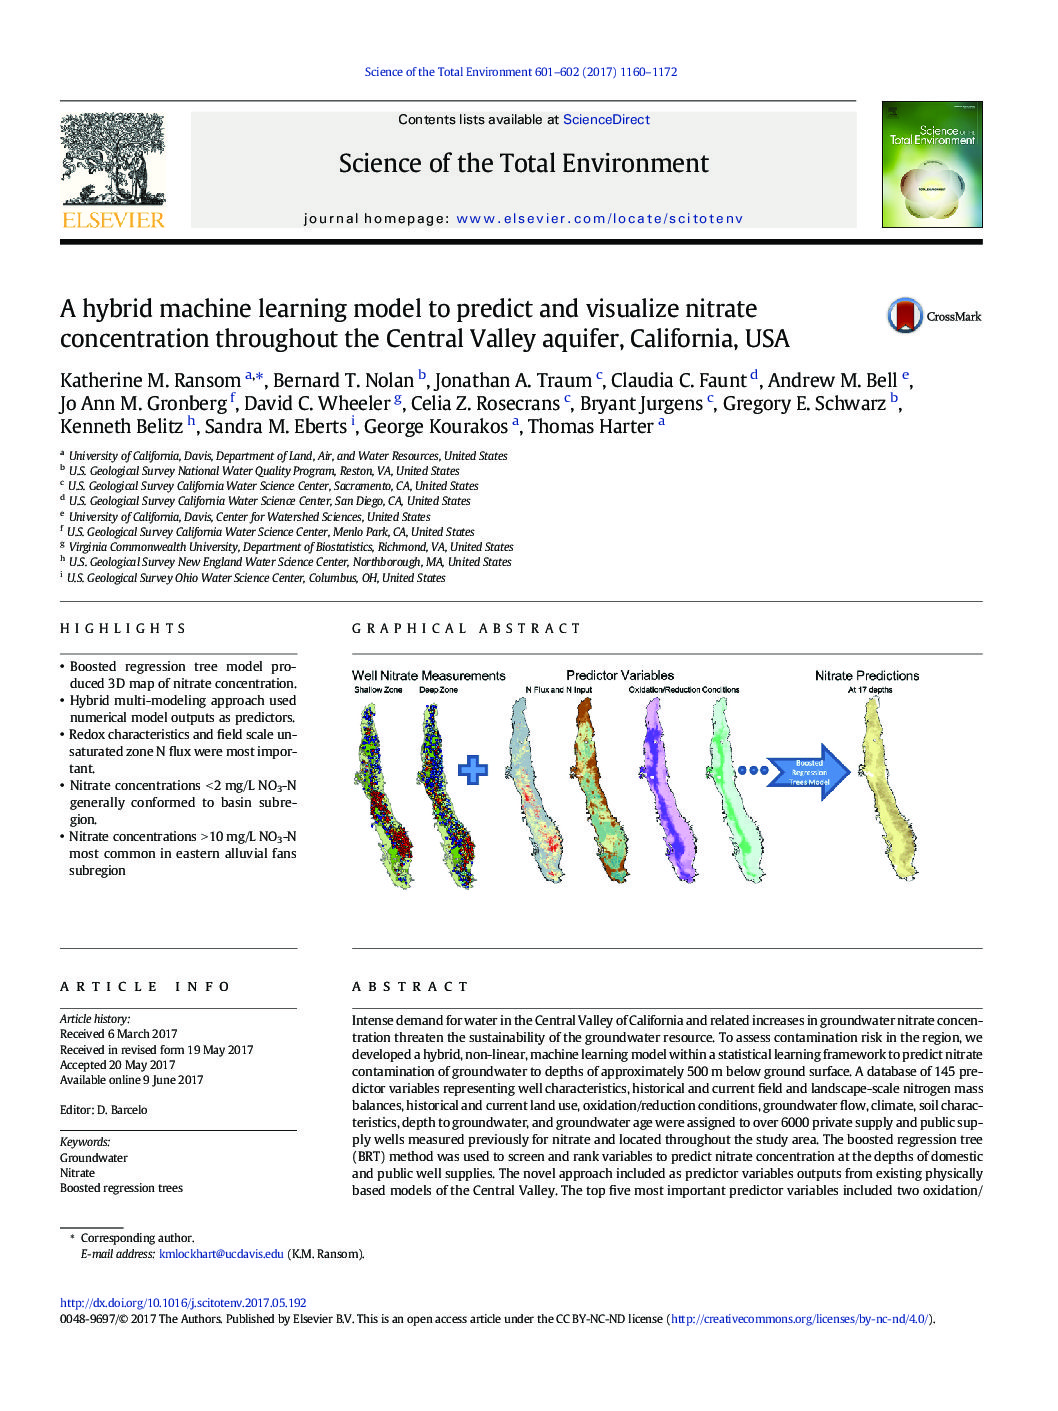 A hybrid machine learning model to predict and visualize nitrate concentration throughout the Central Valley aquifer, California, USA